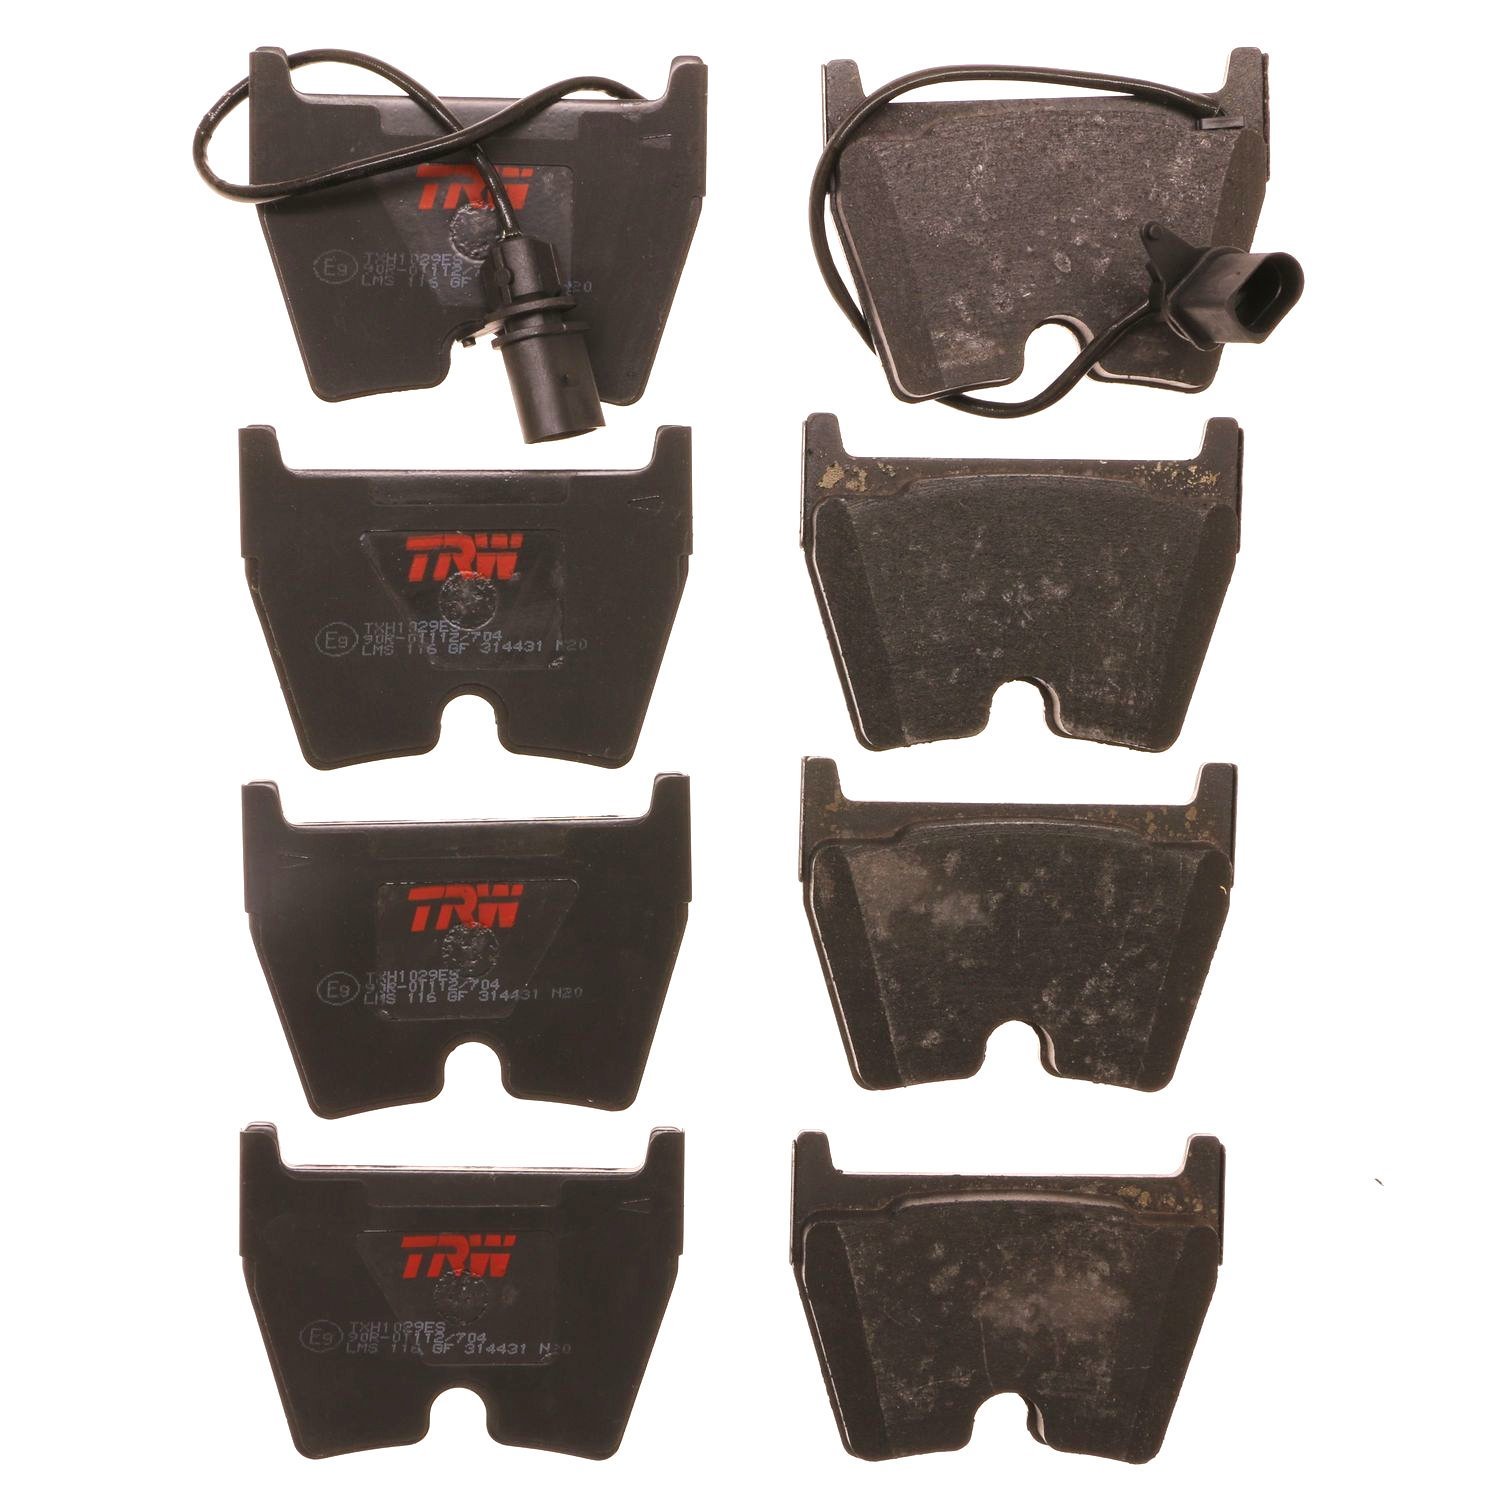 TXH1029ES Ultra-Series Disc Brake Pad Set for Audi R8 2012-08; 2015-14, RS4 2008-07, RS5 2015-13, RS6 2004-03, Position: Front